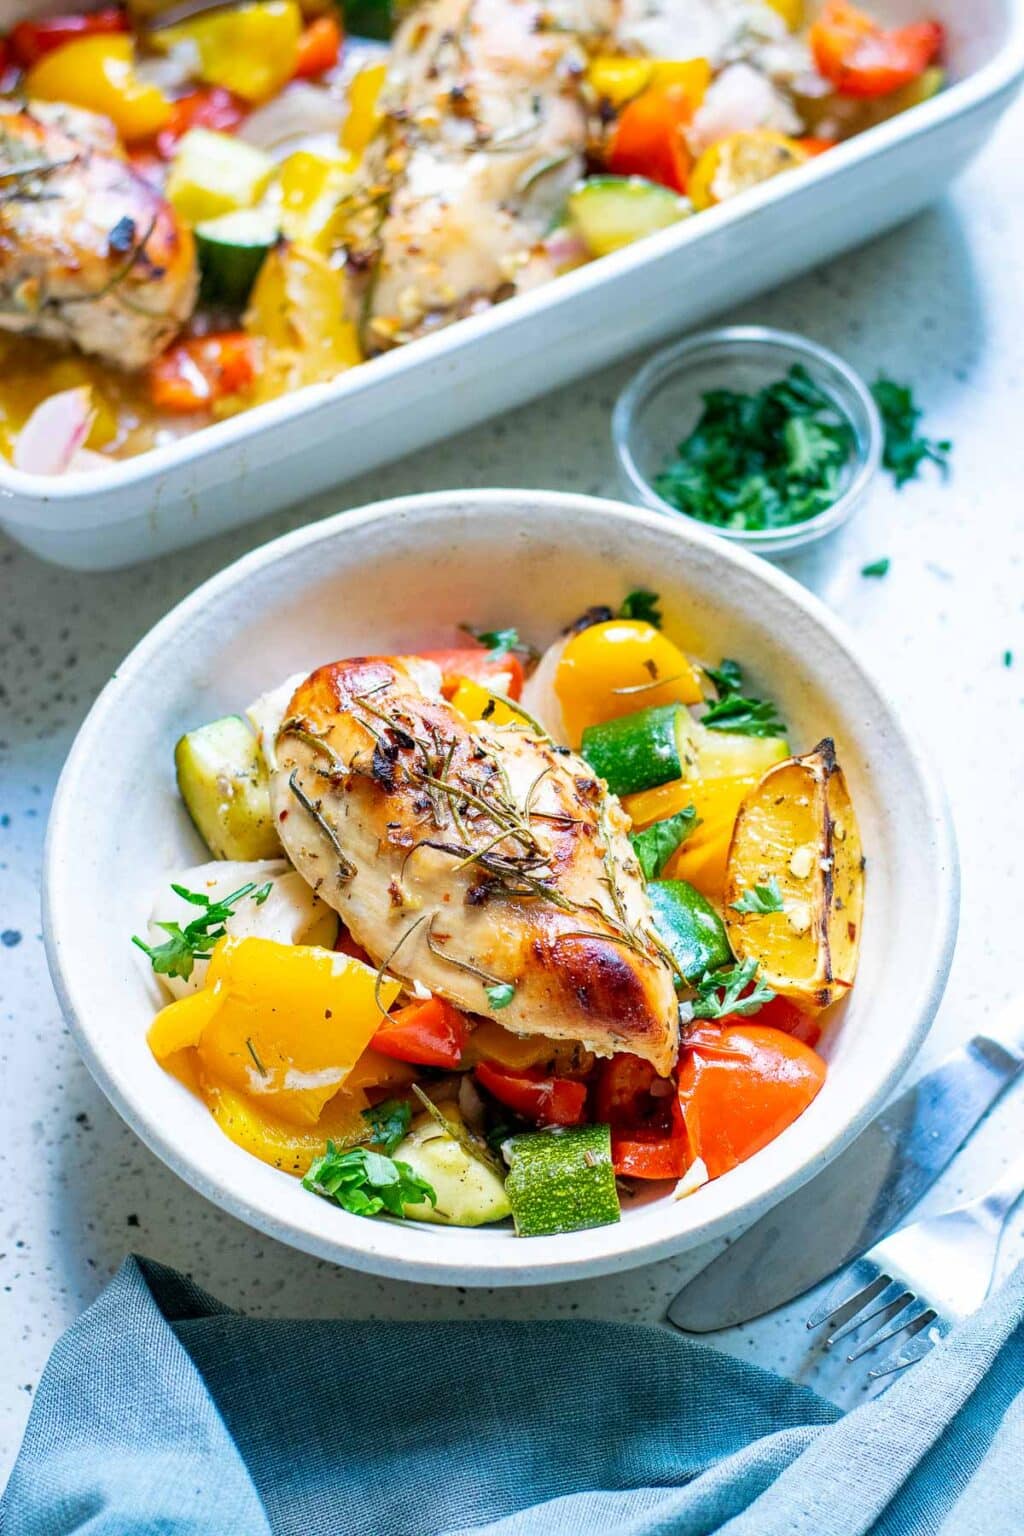 Rosemary Roasted Chicken Breasts with Vegetables - Boulder Locavore